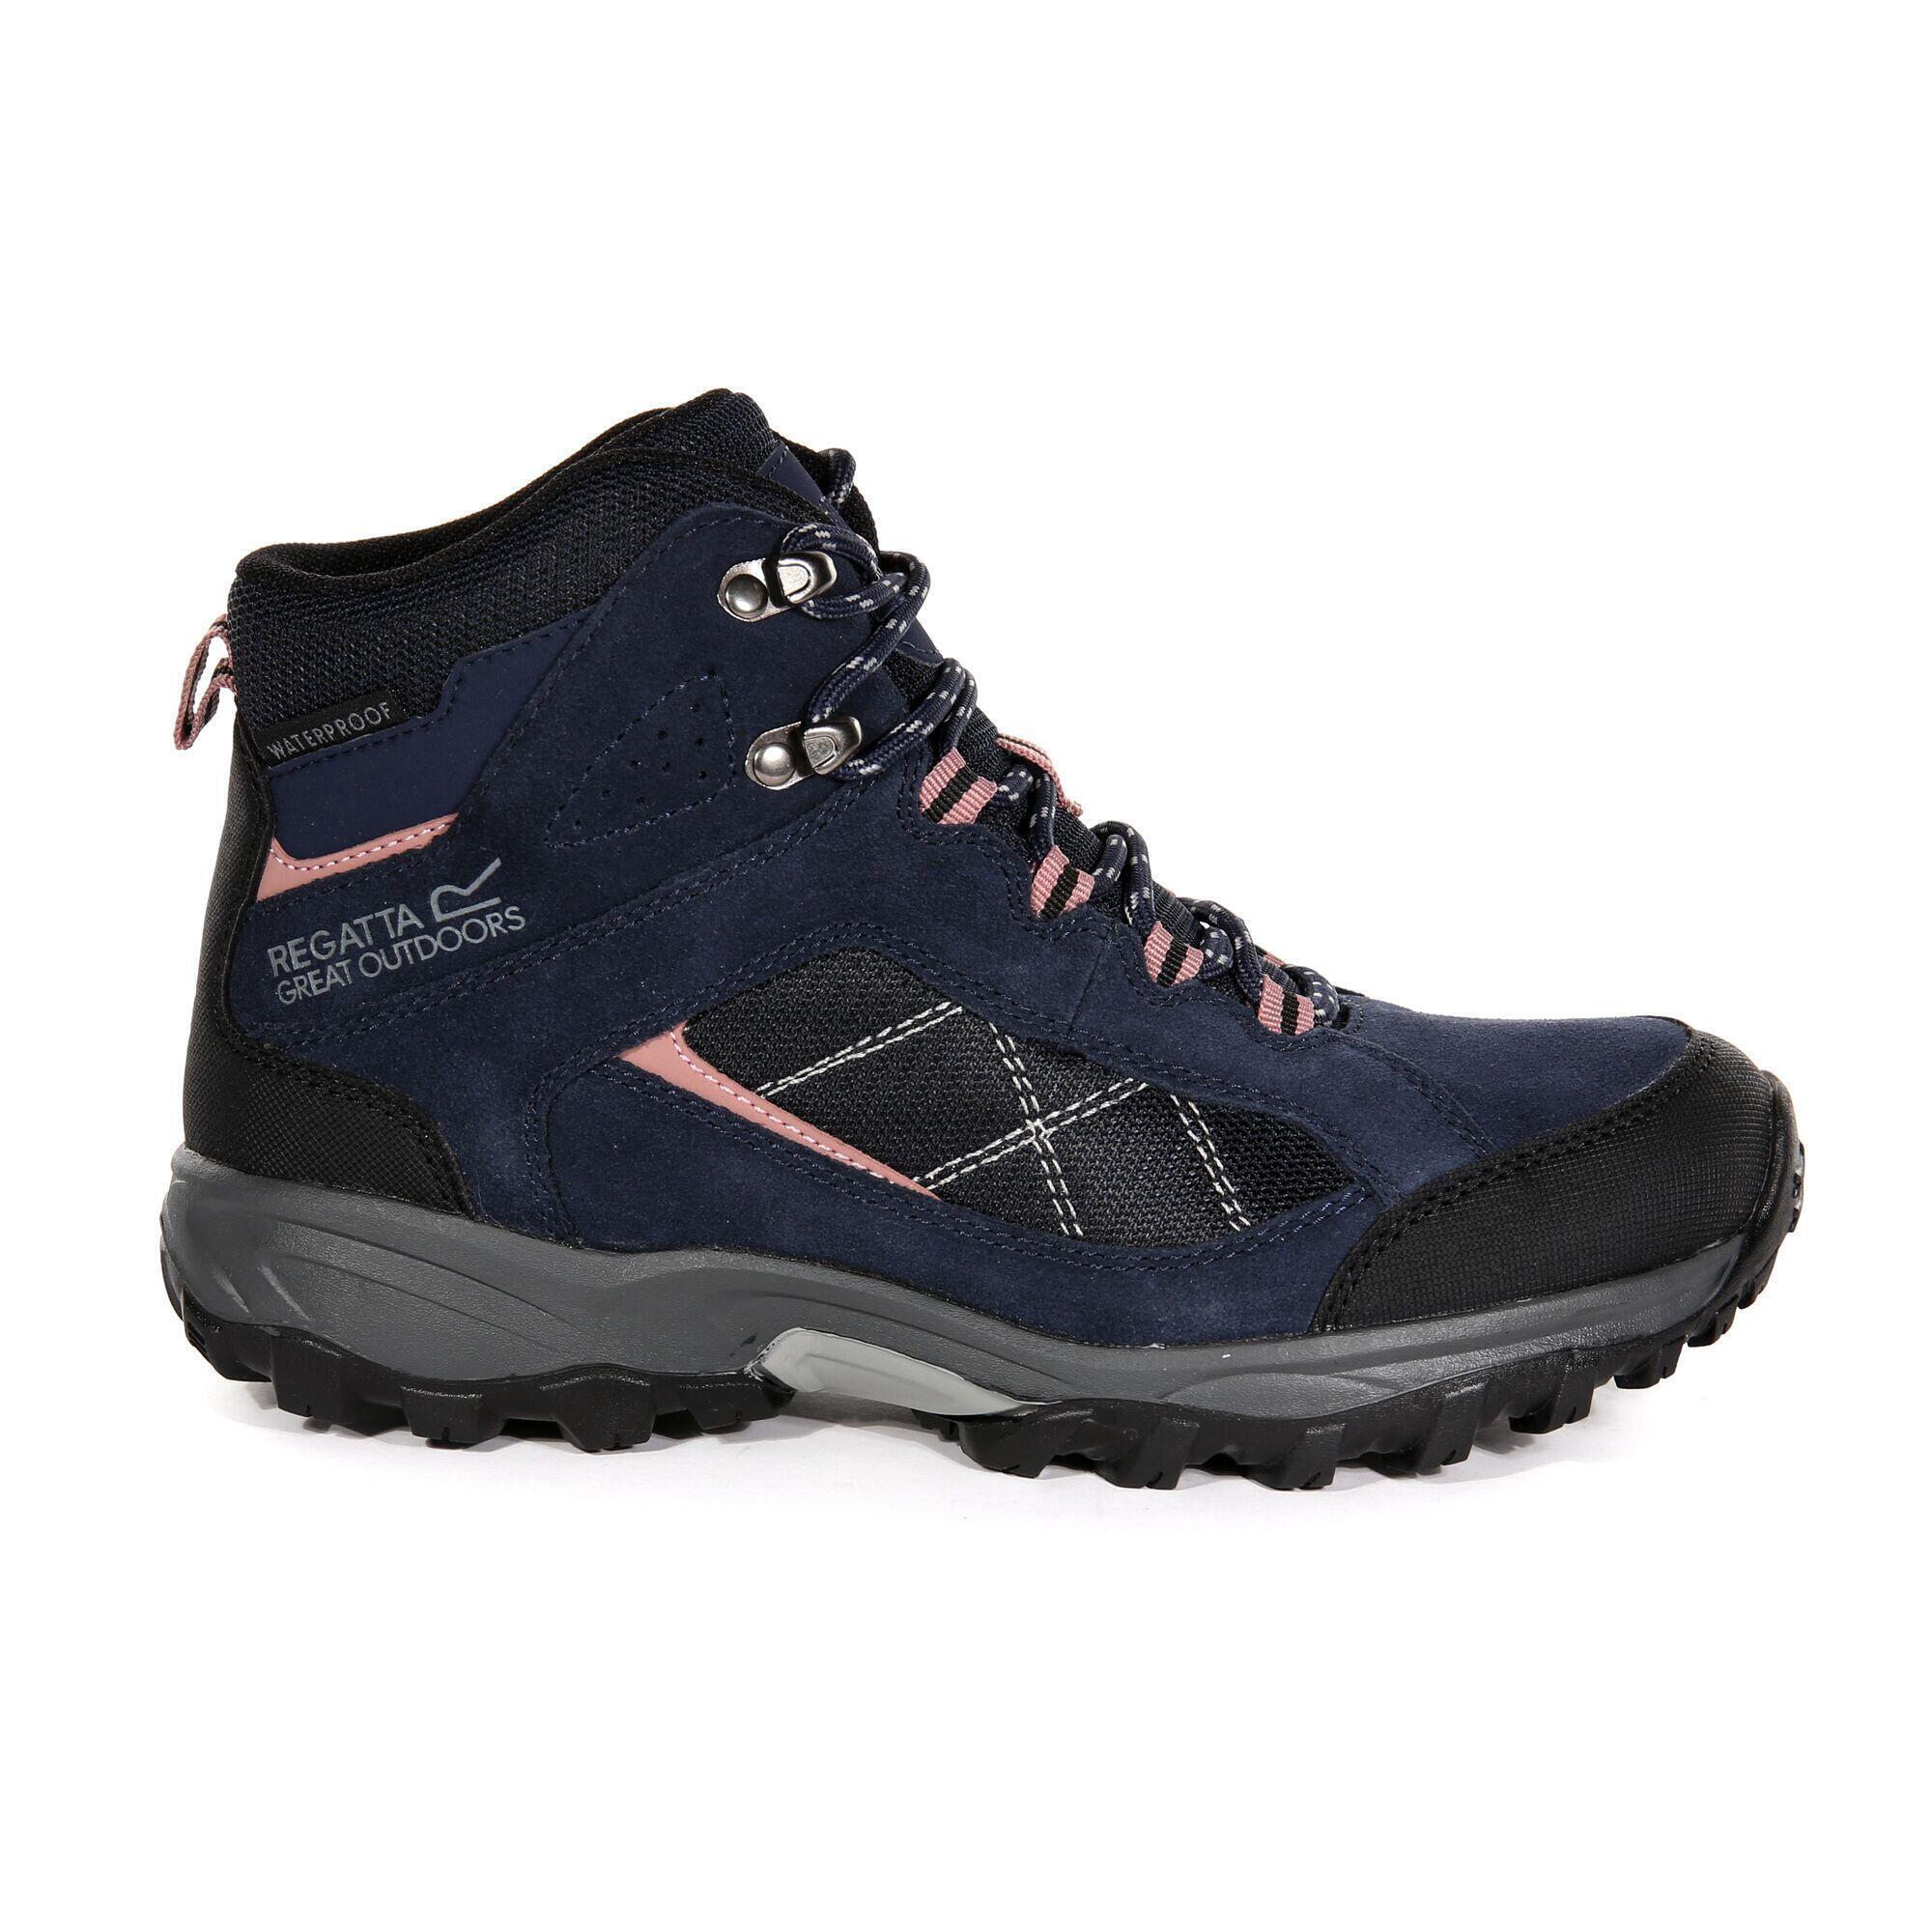 Great Outdoors Womens/Ladies Lady Clydebank Waterproof Hiking Boots (Navy/Ash 2/4